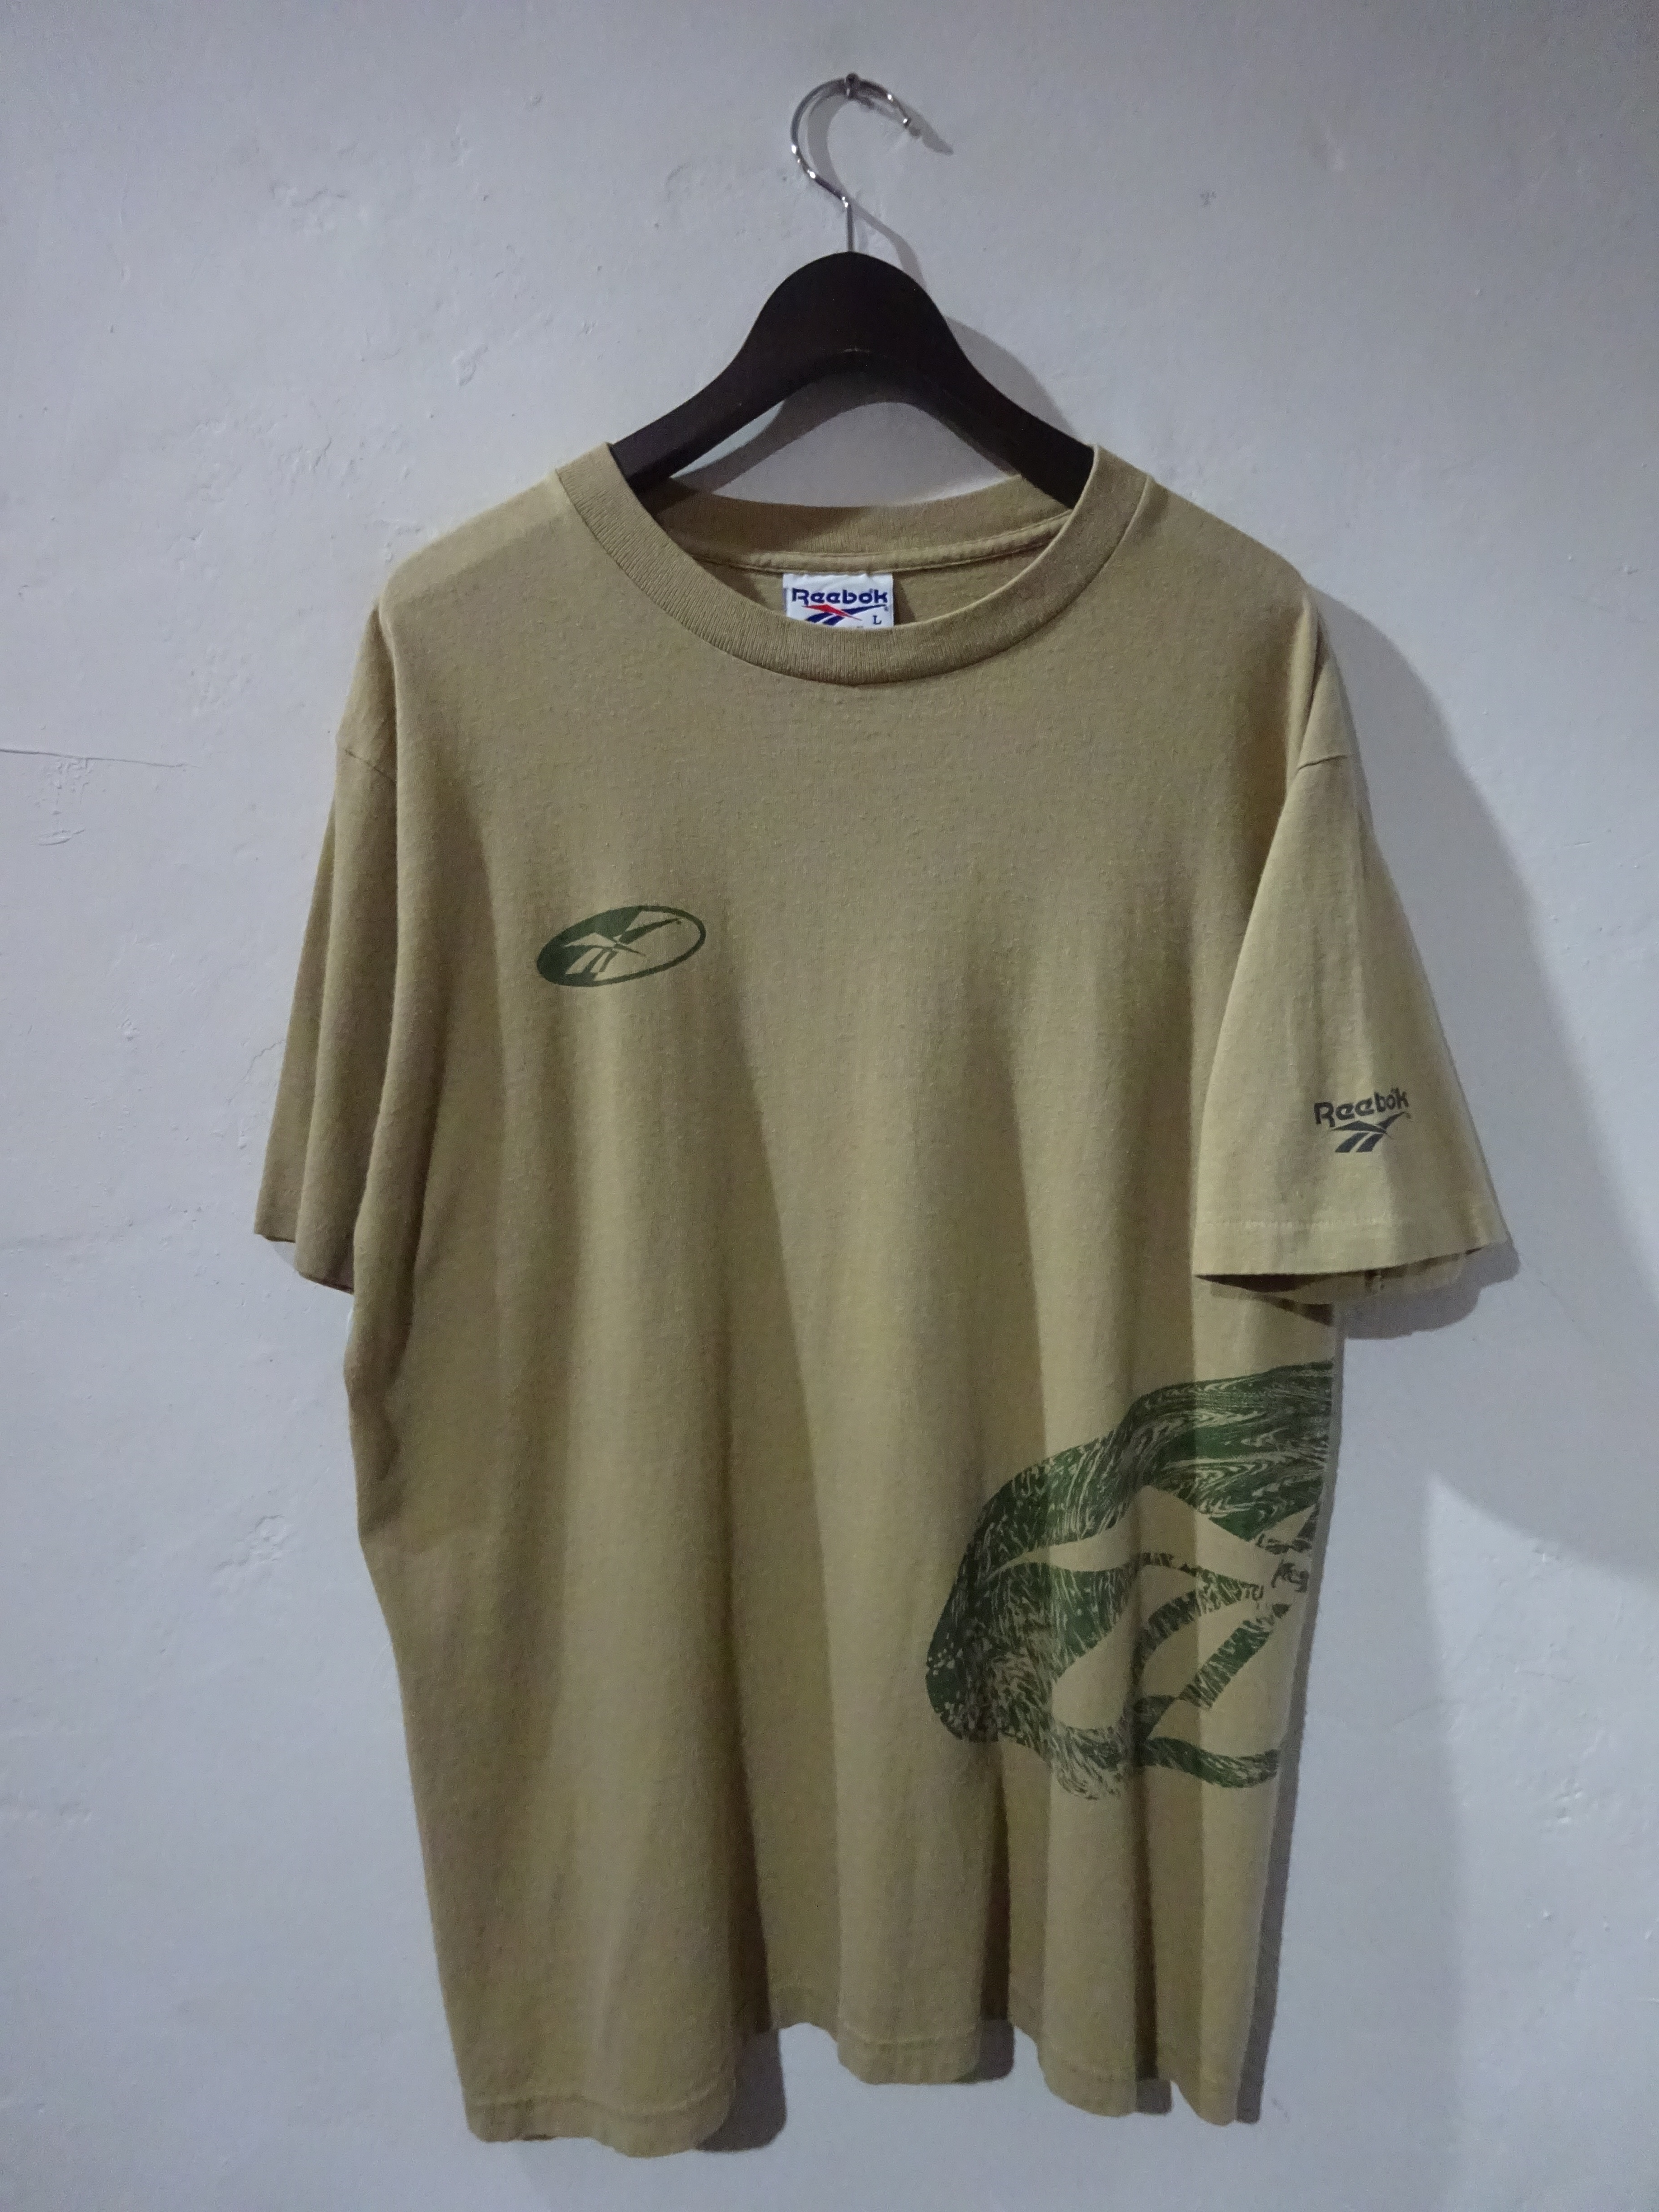 90s MADE IN USA Reebok T-Shirts “ビッグロ 